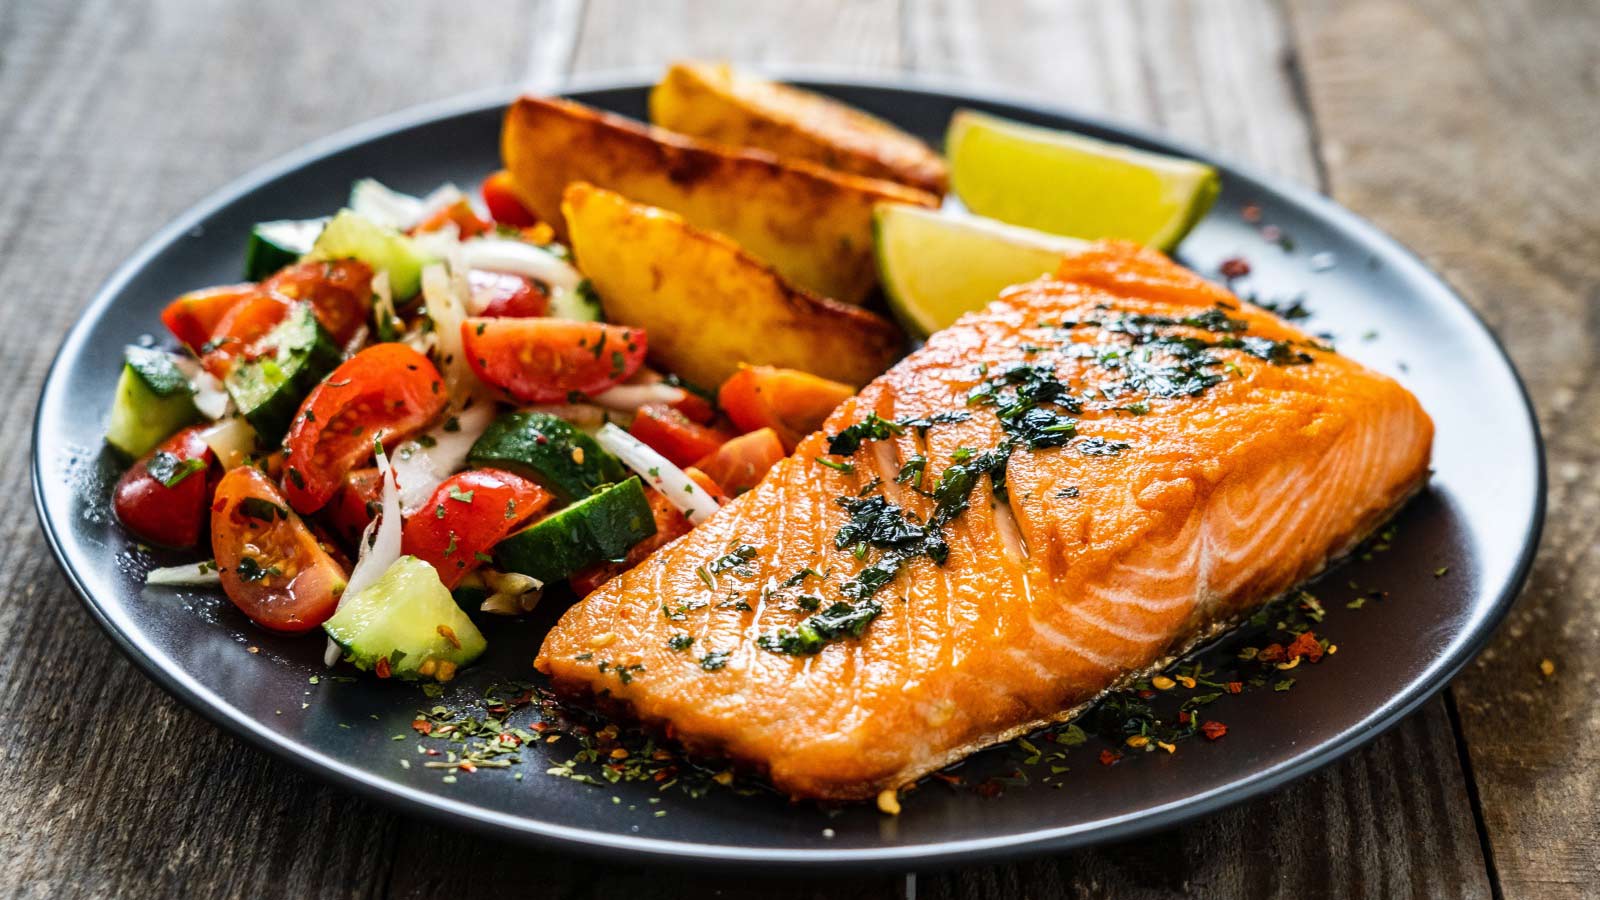 Salmon For Dinner Tonight? These Are The 13 Best Side Dishes For That